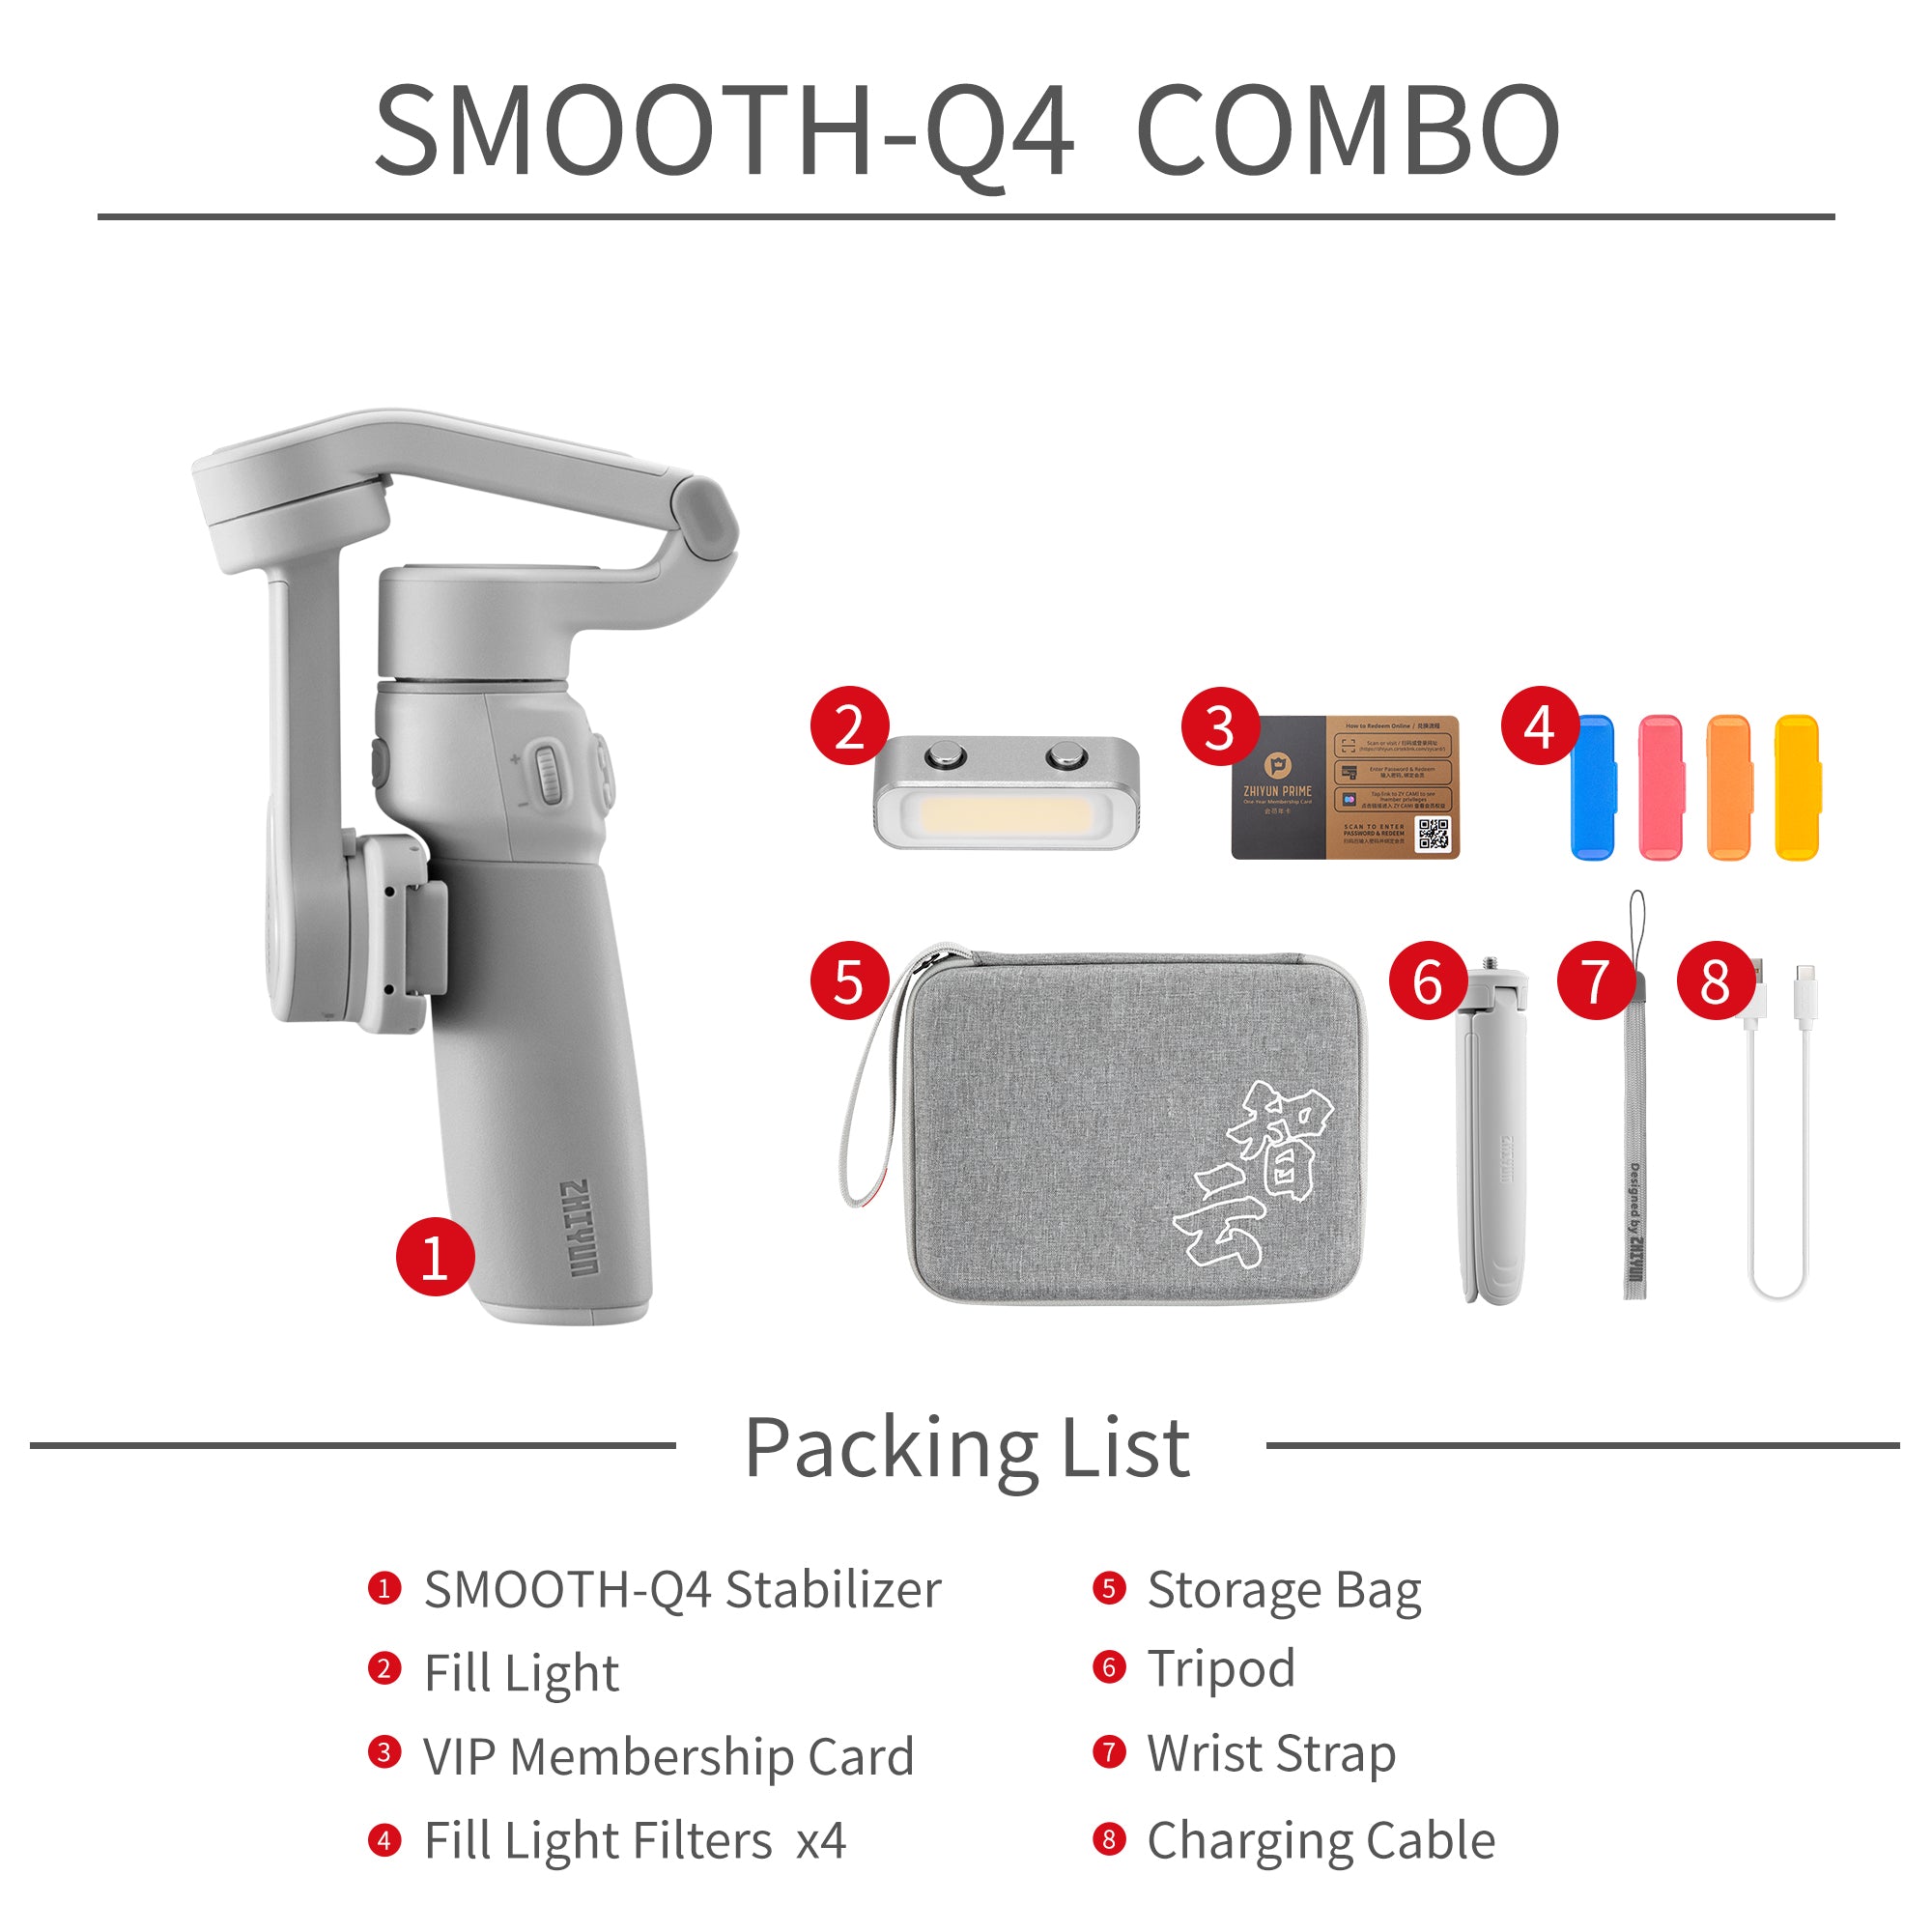 ZHIYUN Smooth Q4 Combo Kit Package List